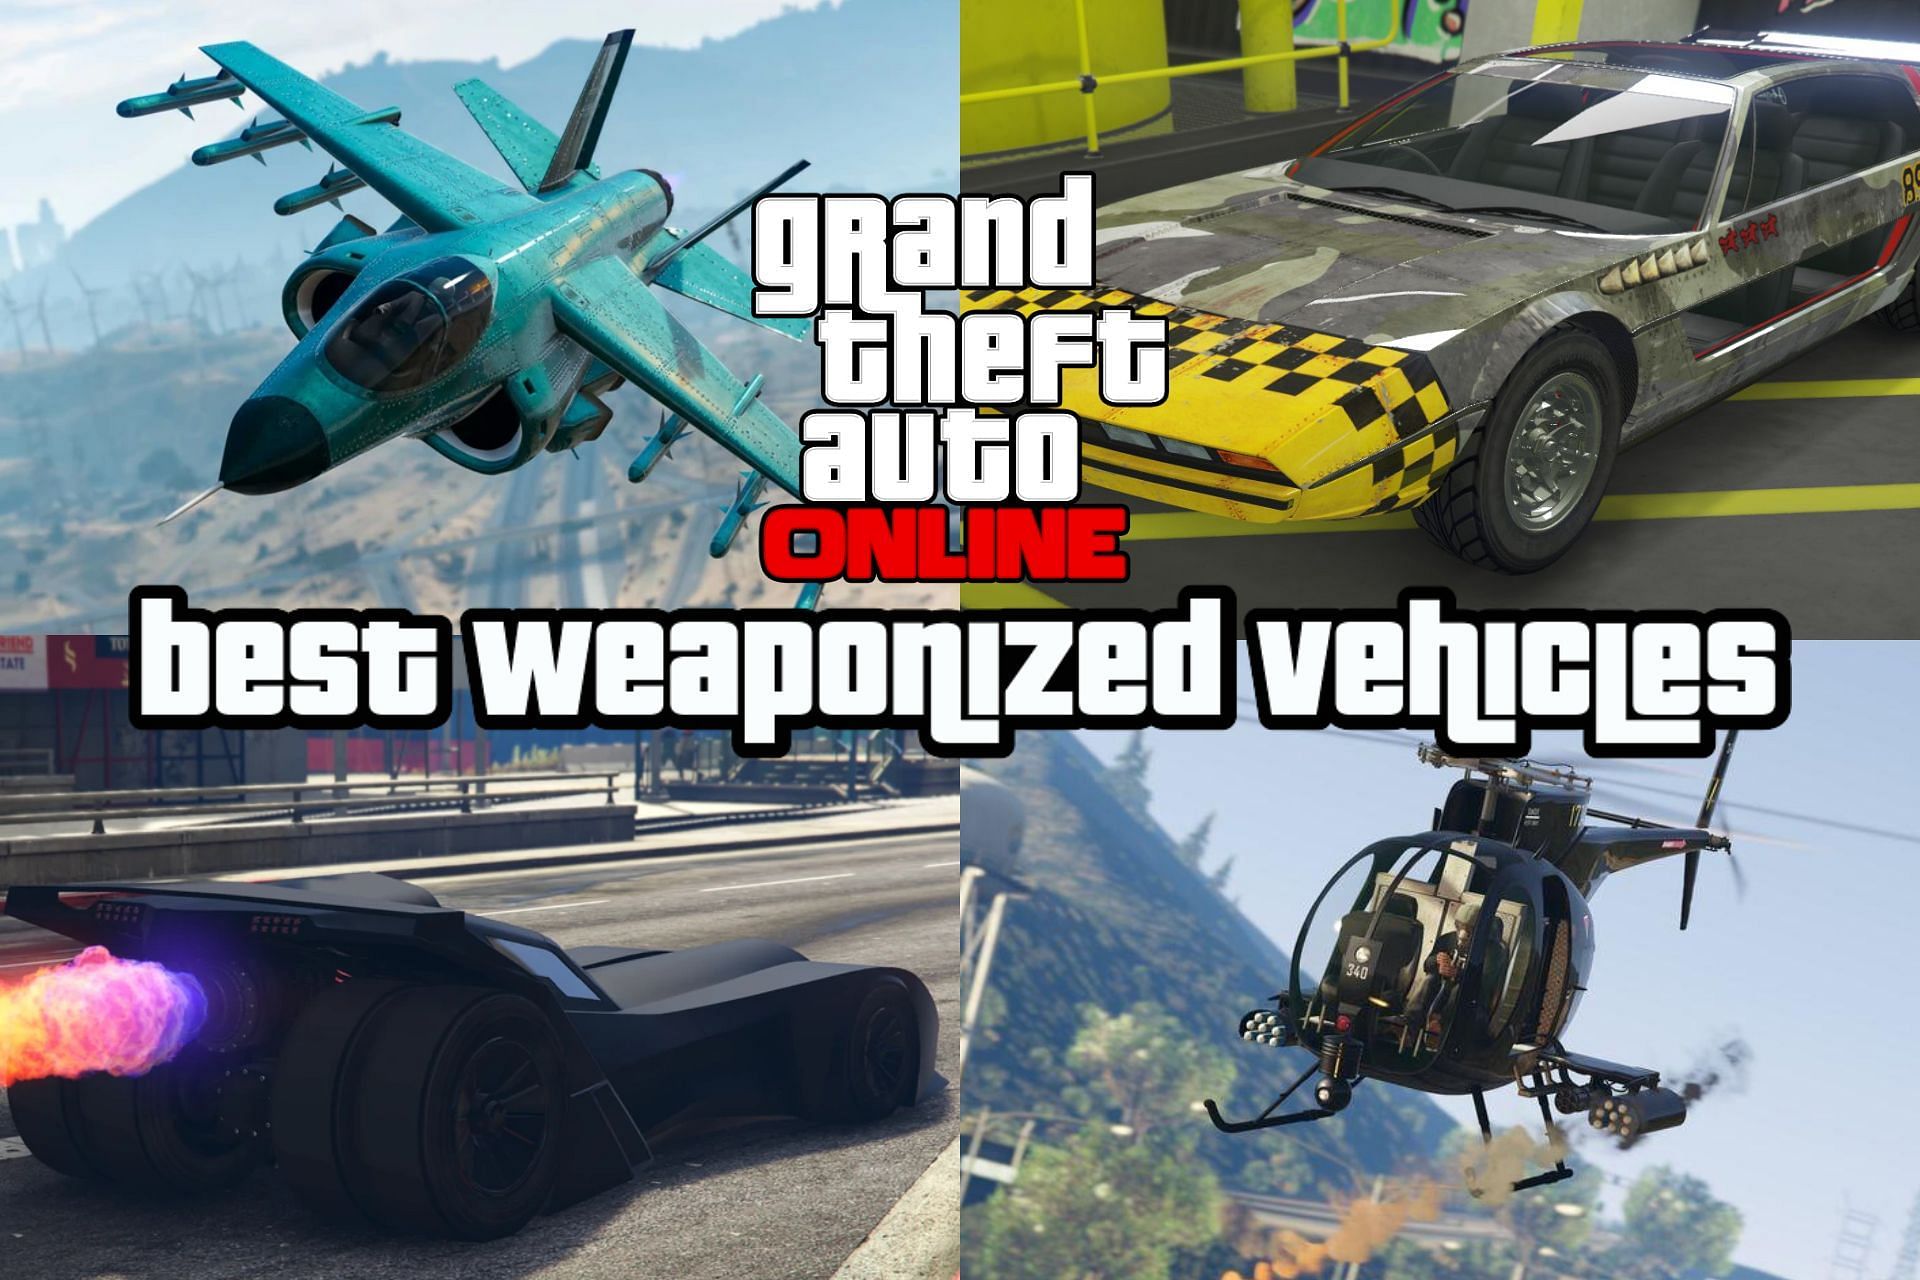 Top 5 weaponized vehicles that GTA Online players should consider buying